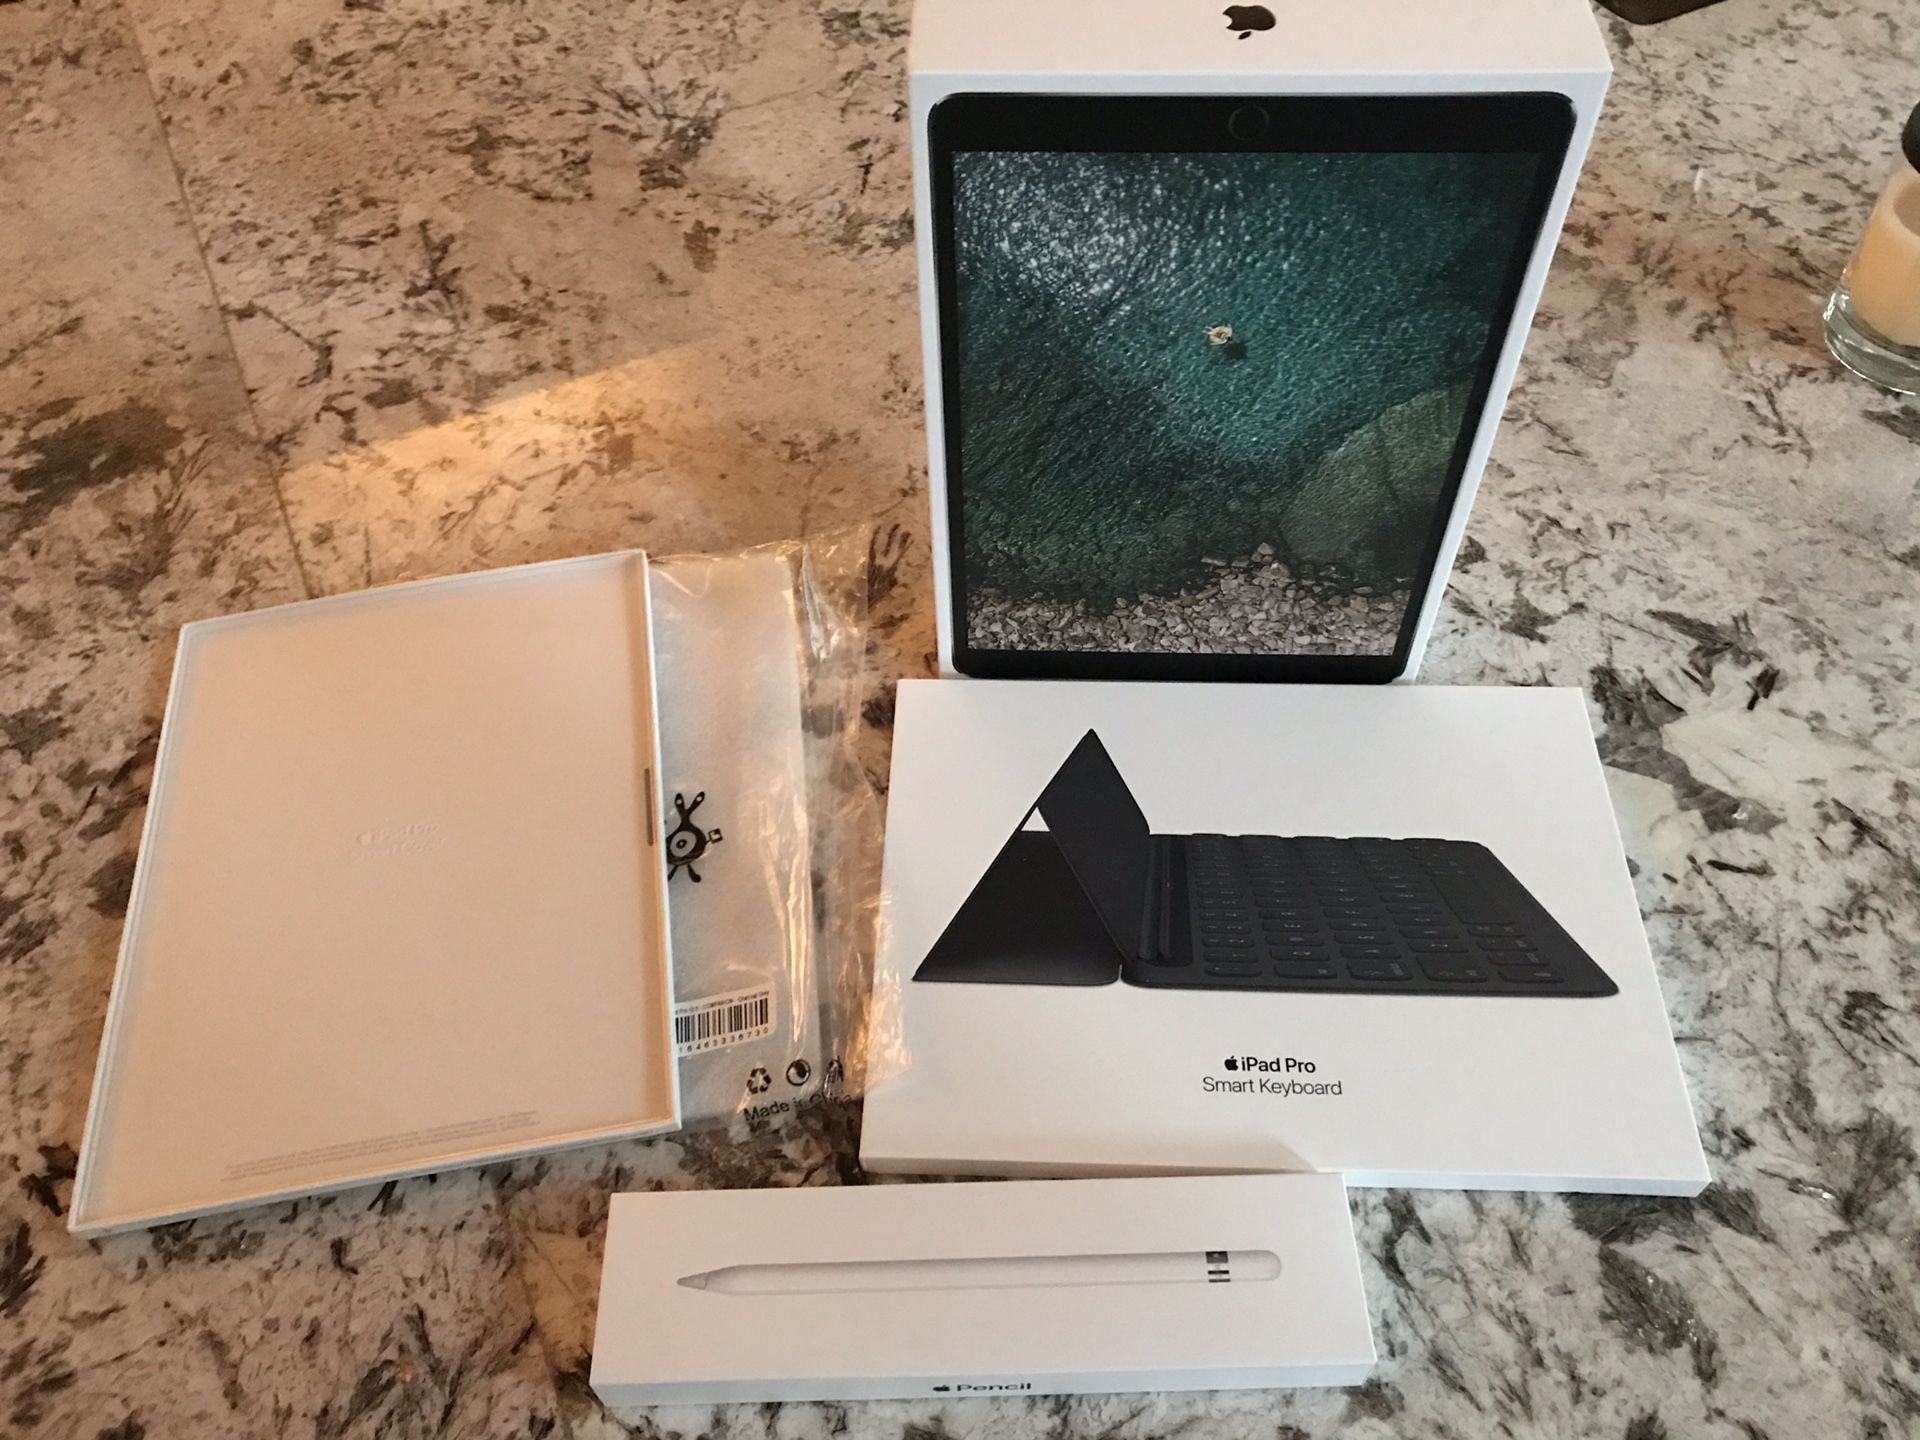 iPad Pro 10.5” 256GB WiFi Space Gray with Accessories